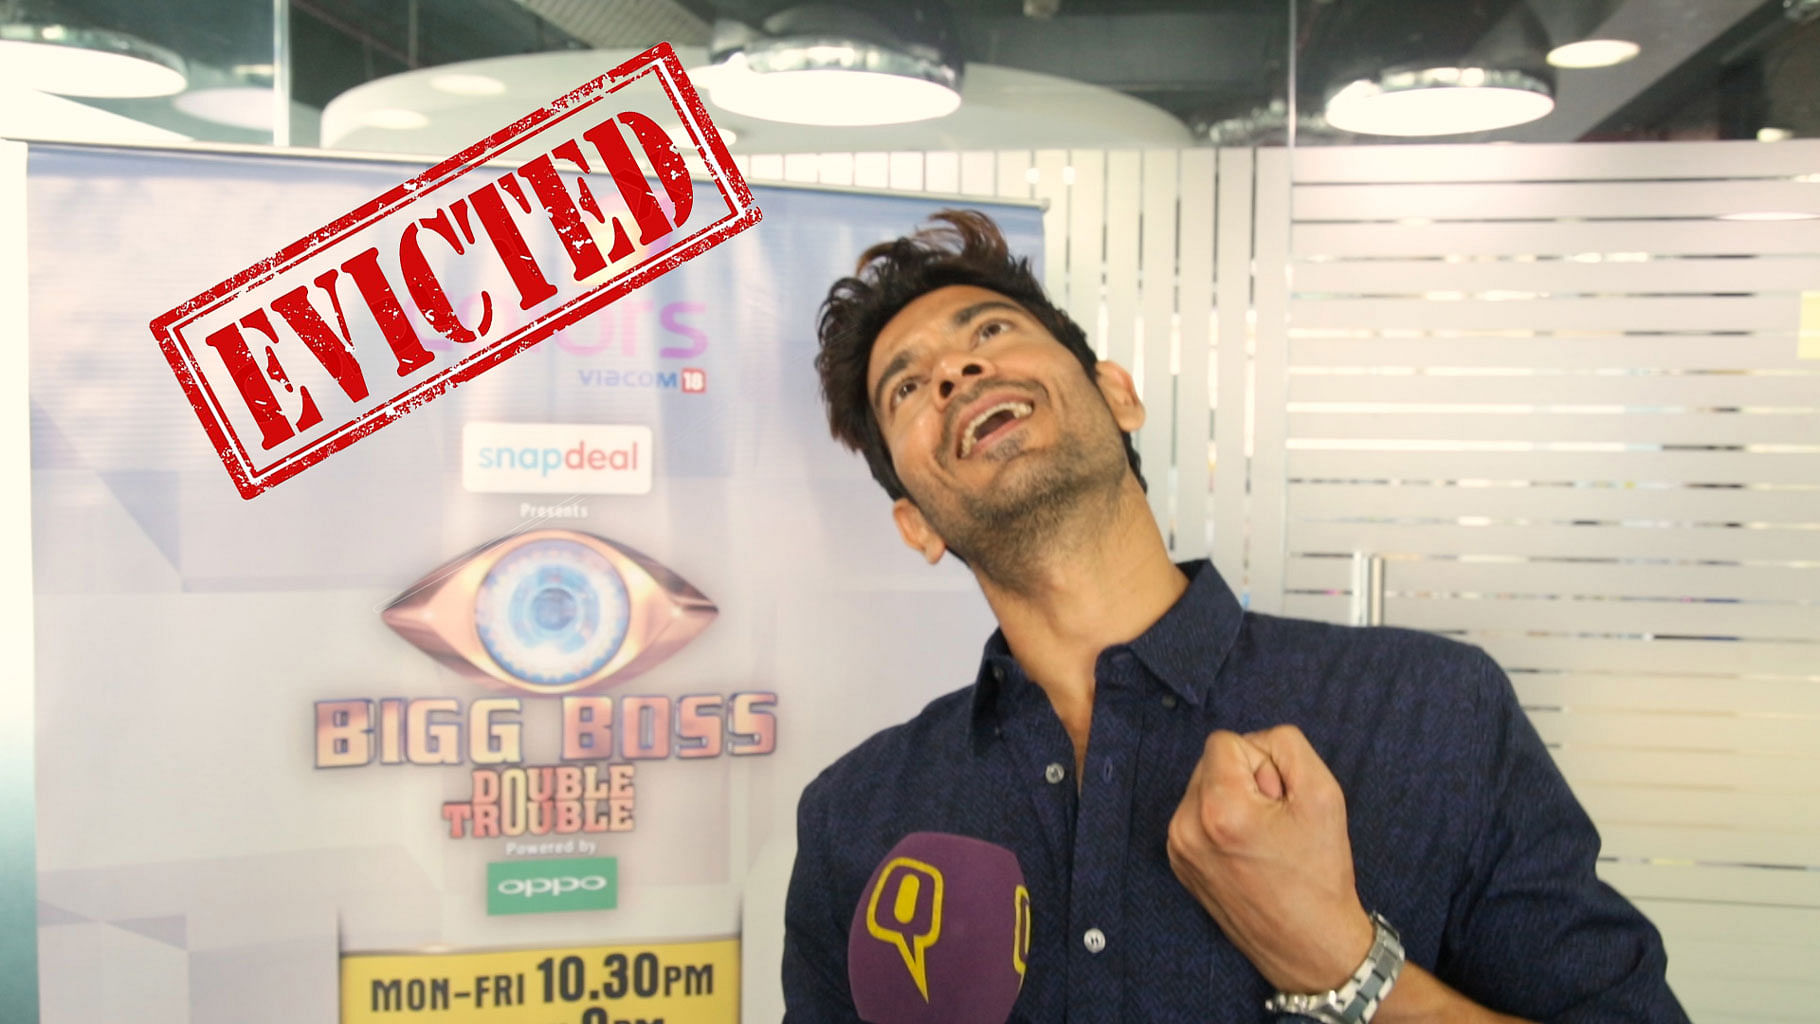 Keith Sequeira is the latest participant to exit the <i>Bigg Boss</i> house (Photo: The Quint)